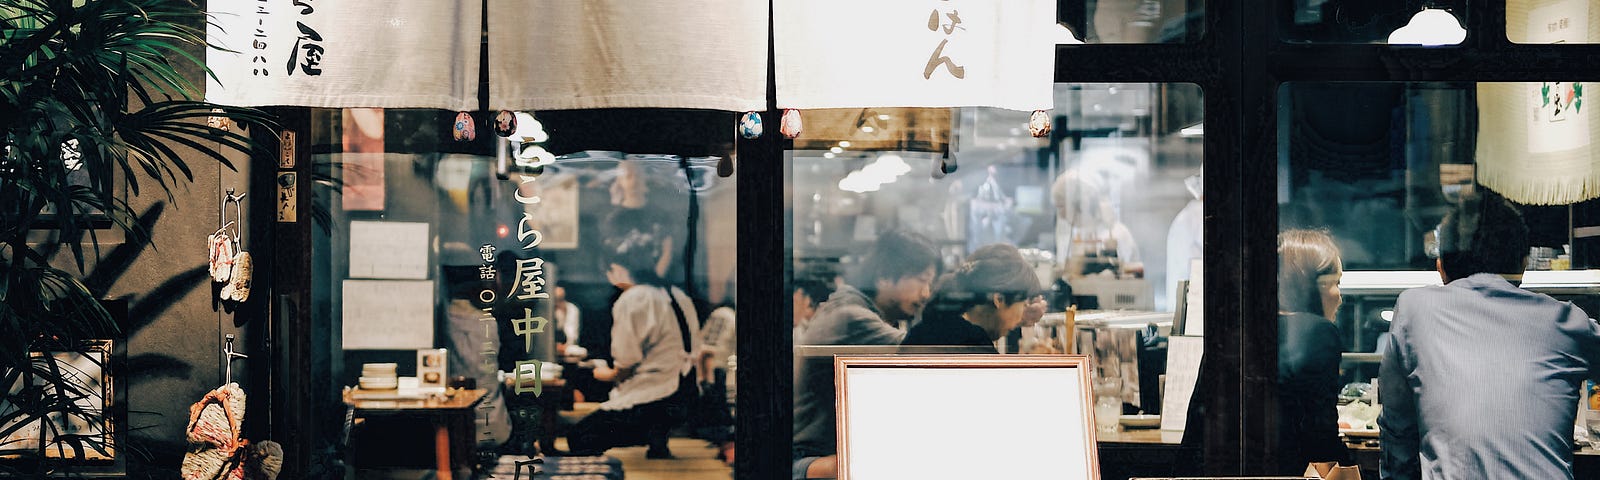 A photo of people dining at night in a Japanese restaurant. The photo is taken just outside of the restaurant, so the people eating inside can be seen.